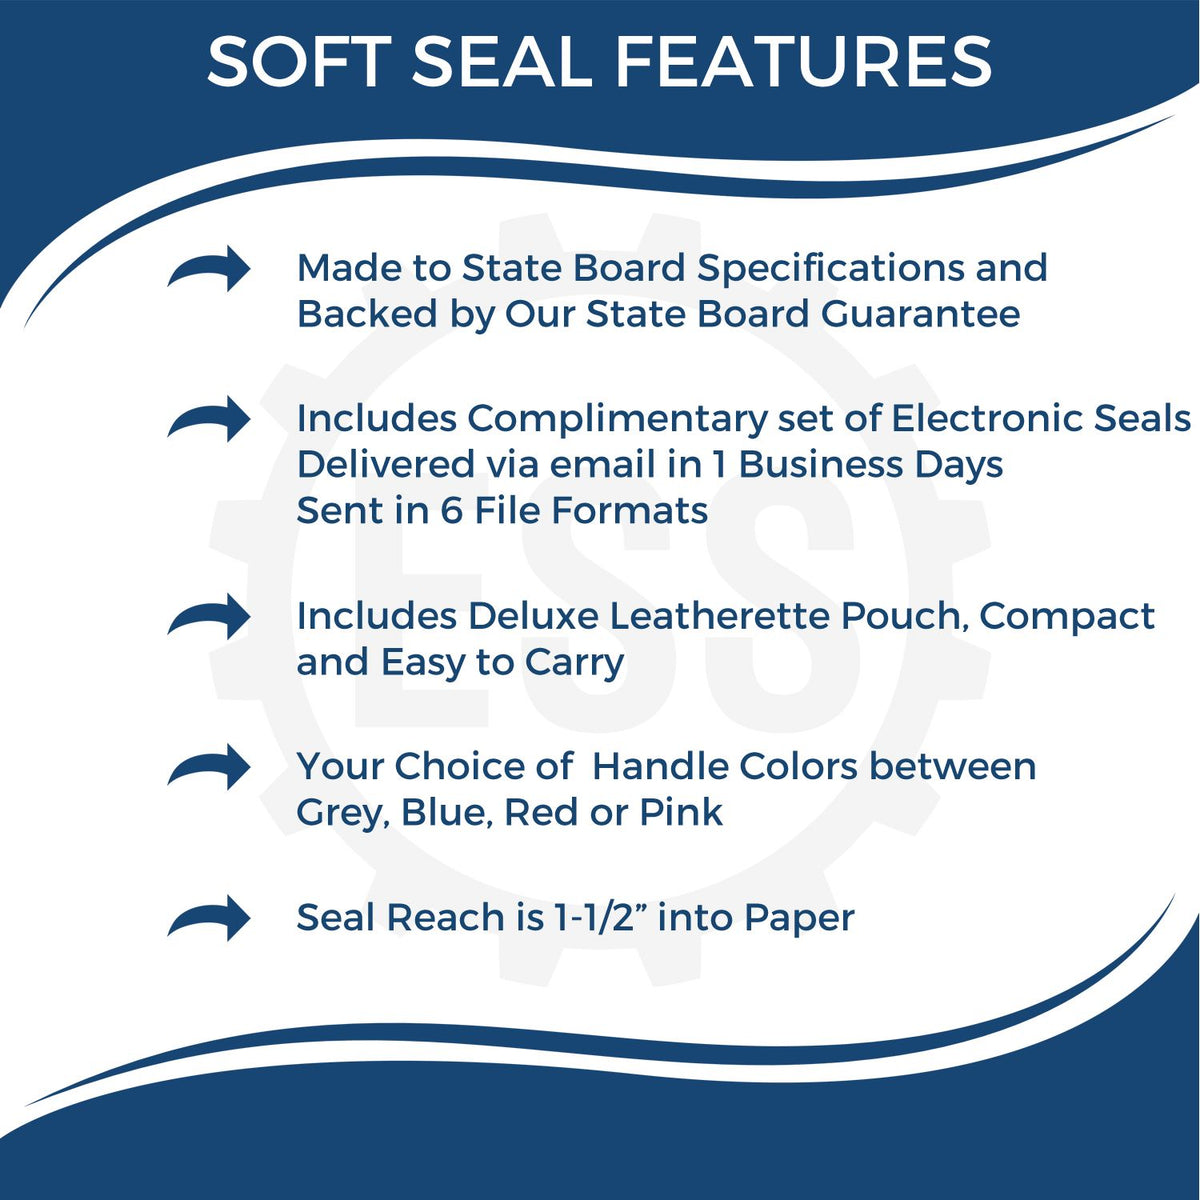 A picture of an infographic highlighting the selling points for the Soft Mississippi Professional Engineer Seal